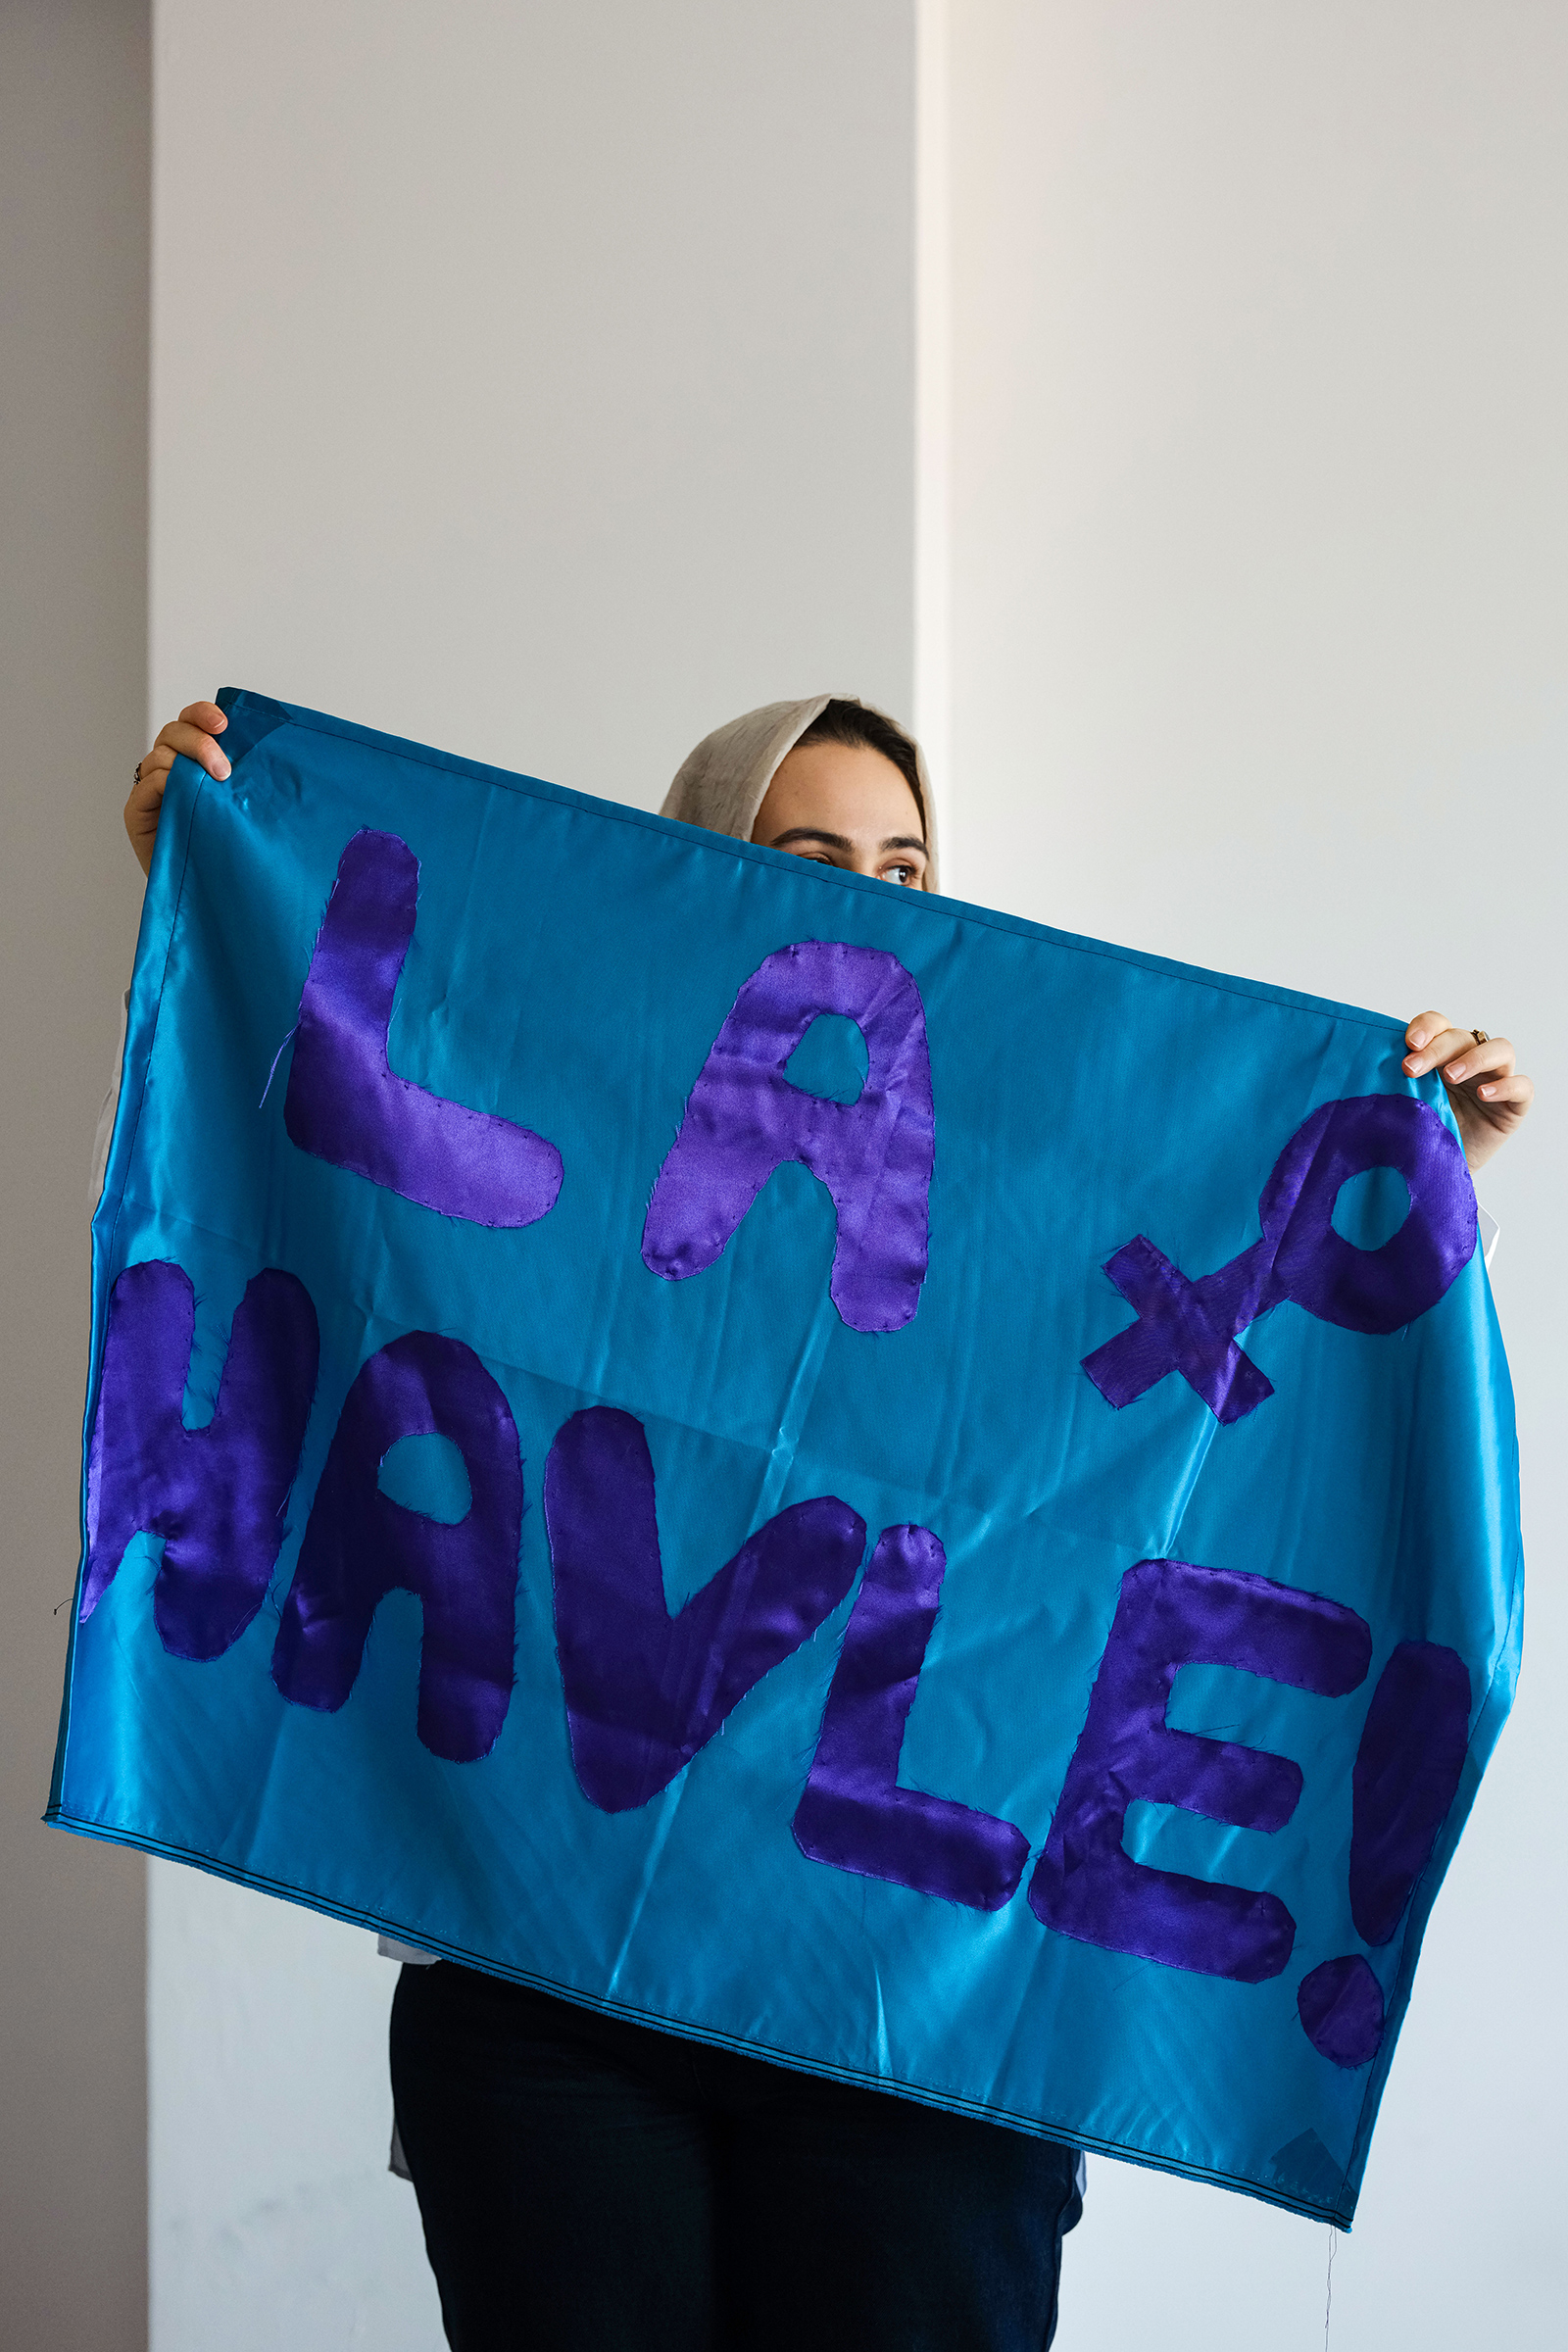 Zeynep, a 28-year-old LGBTQ+ member of the Havle group, holding a Havle sign.